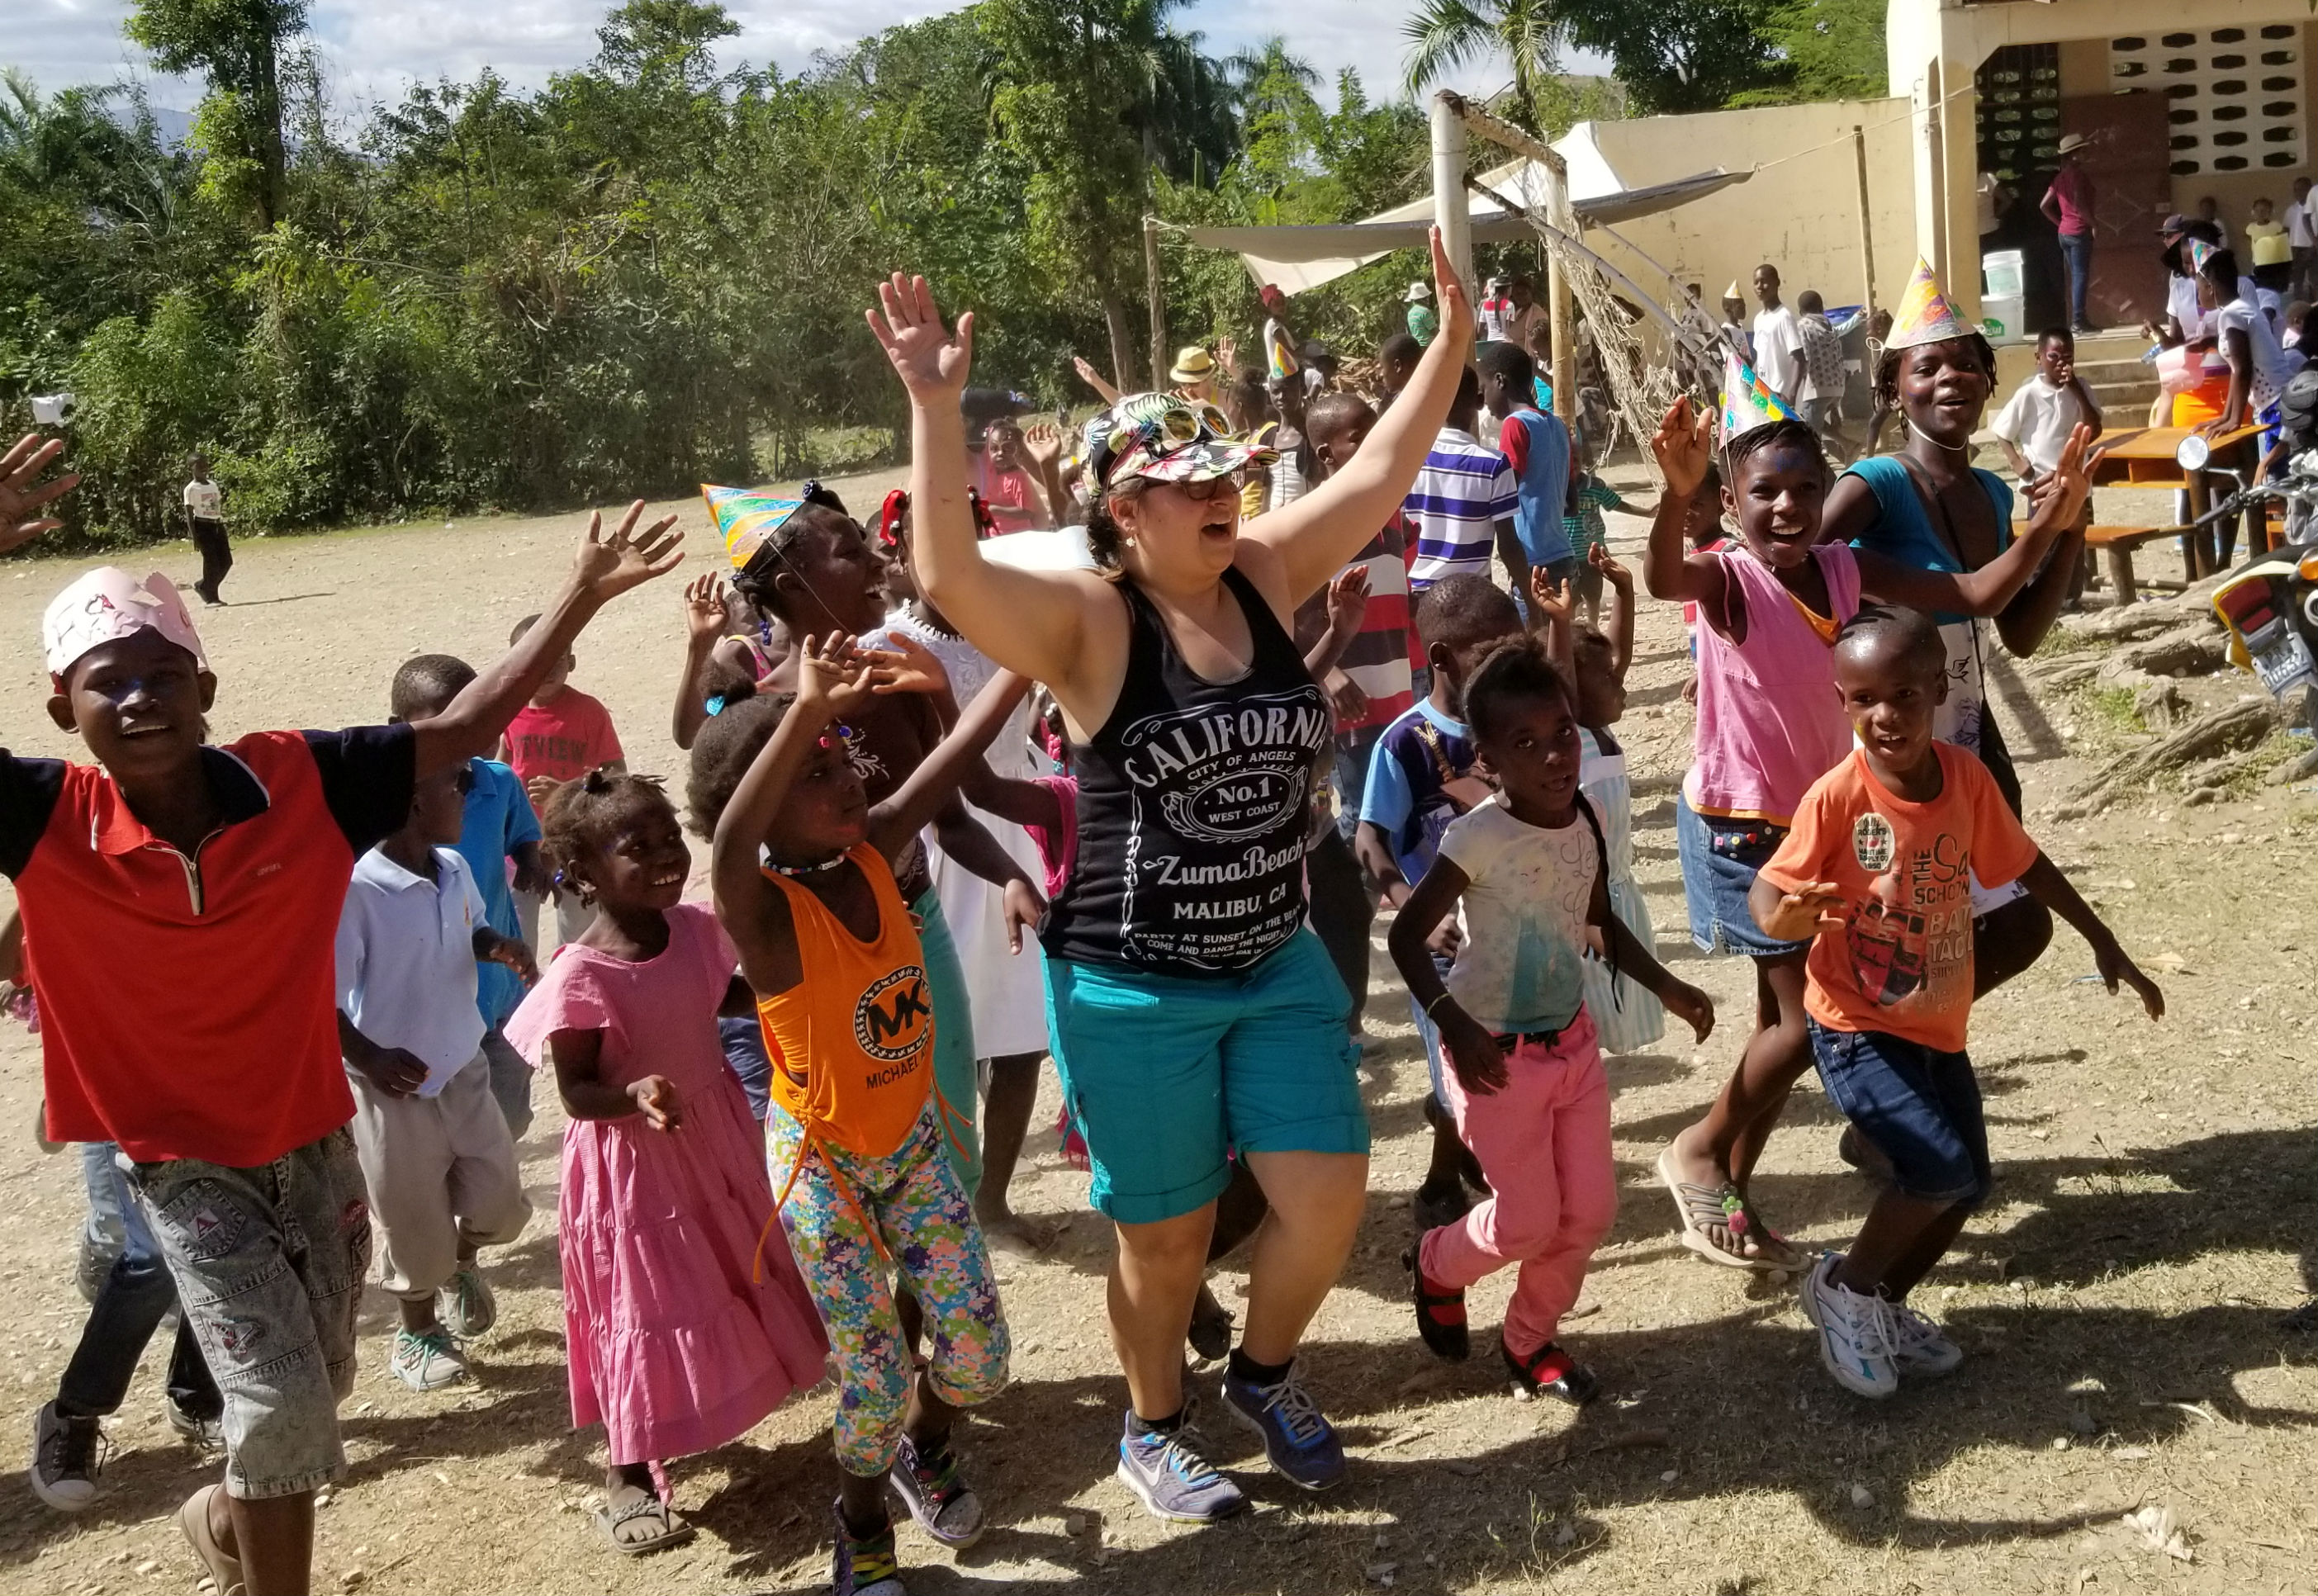 The Children's day camps offered some of the most rewarding experiences during past trips to Haiti.